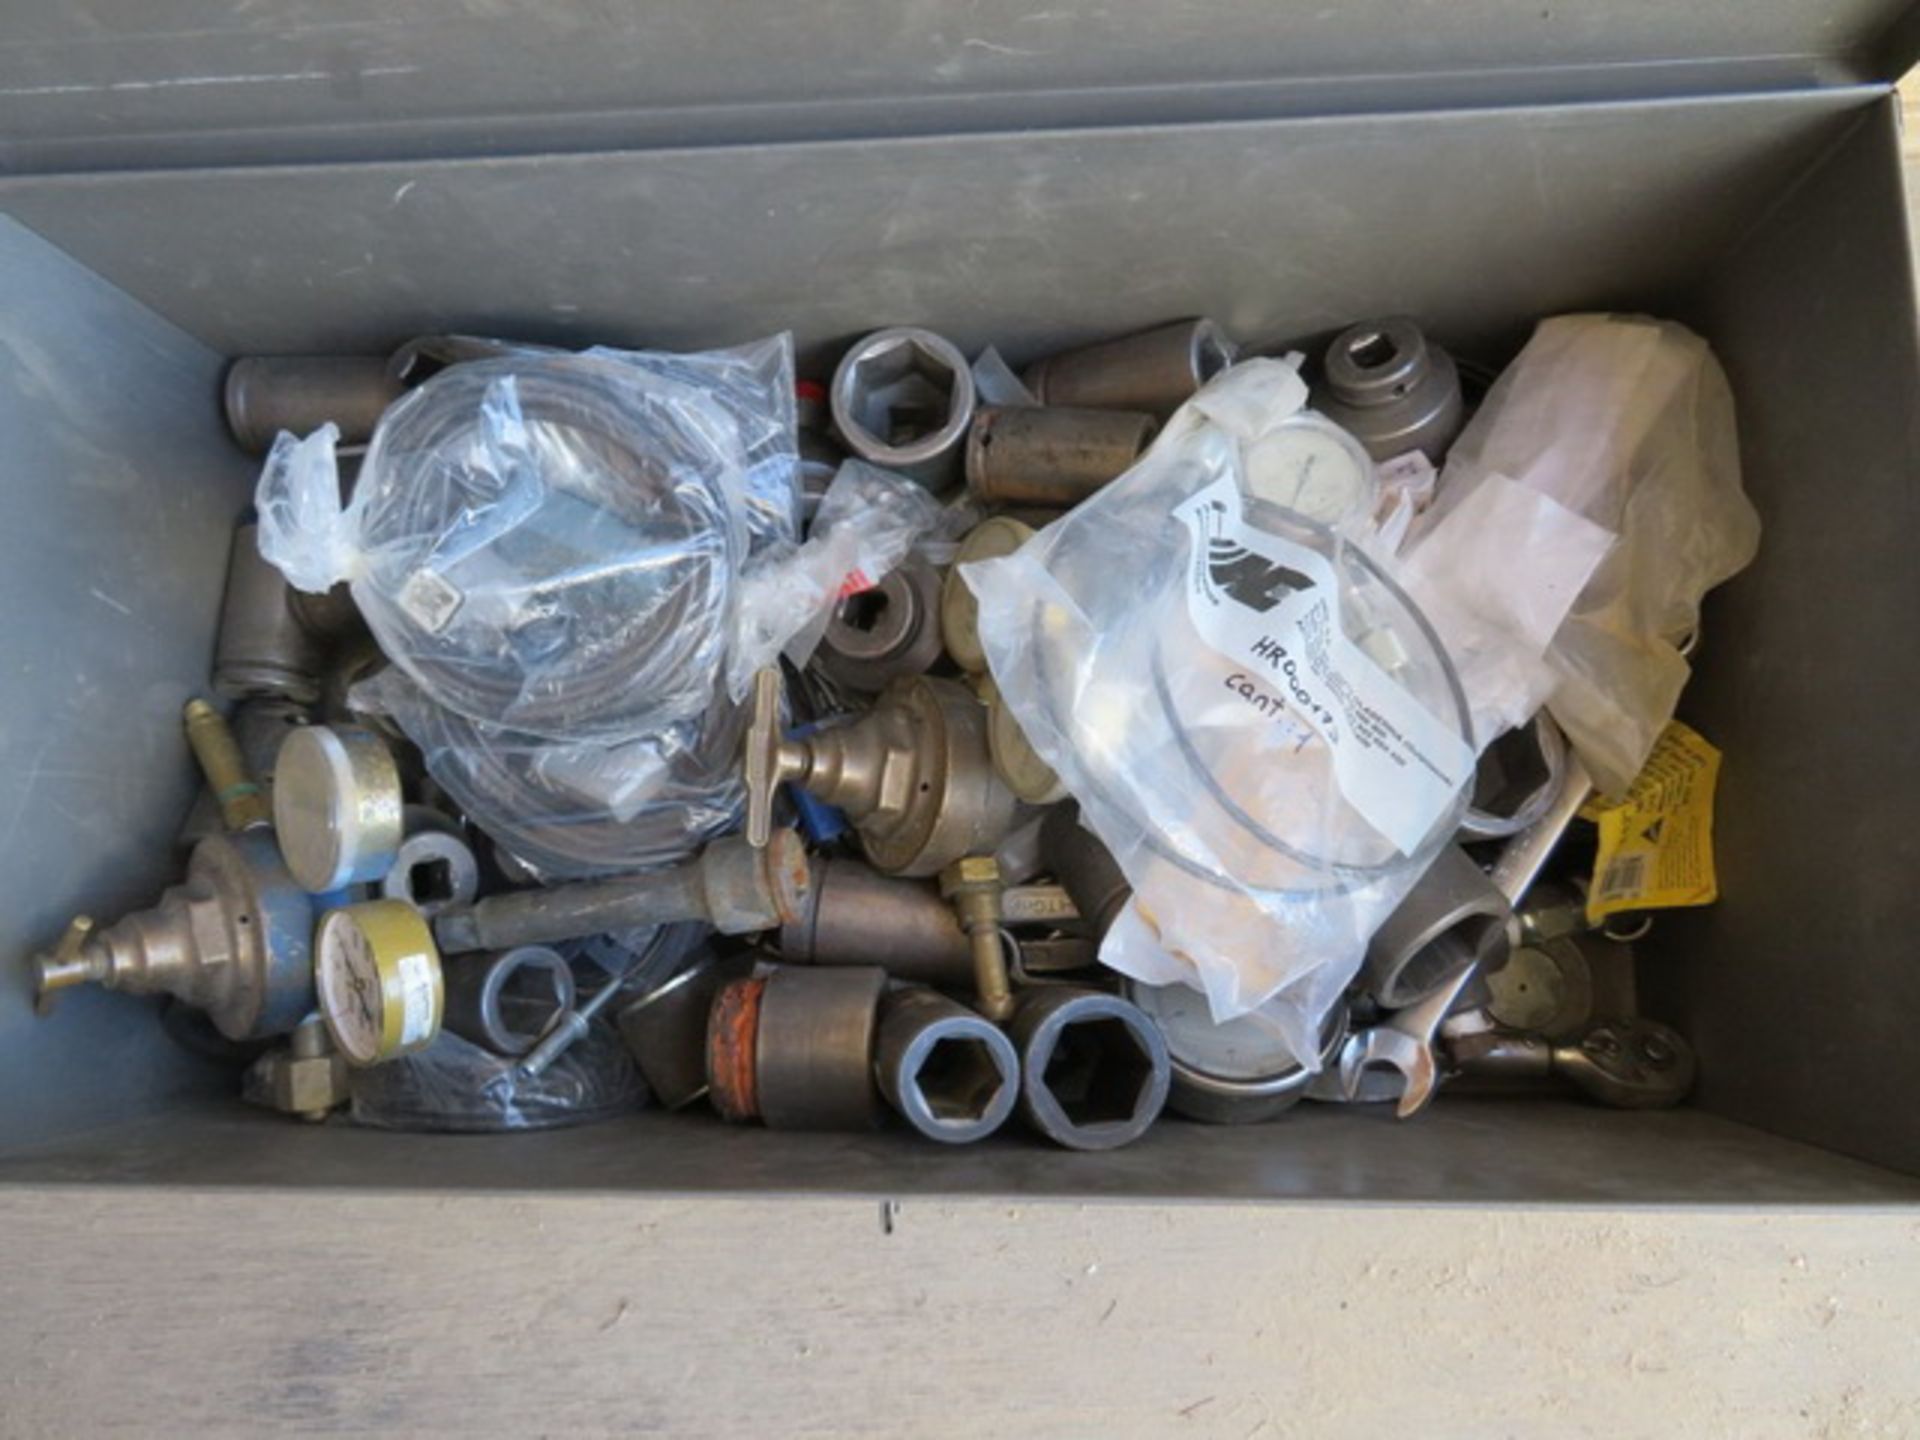 Contents of Shipping Container To Include Face Shields, Blackstone Flap Wheels, Grinding Wheels, - Image 123 of 128